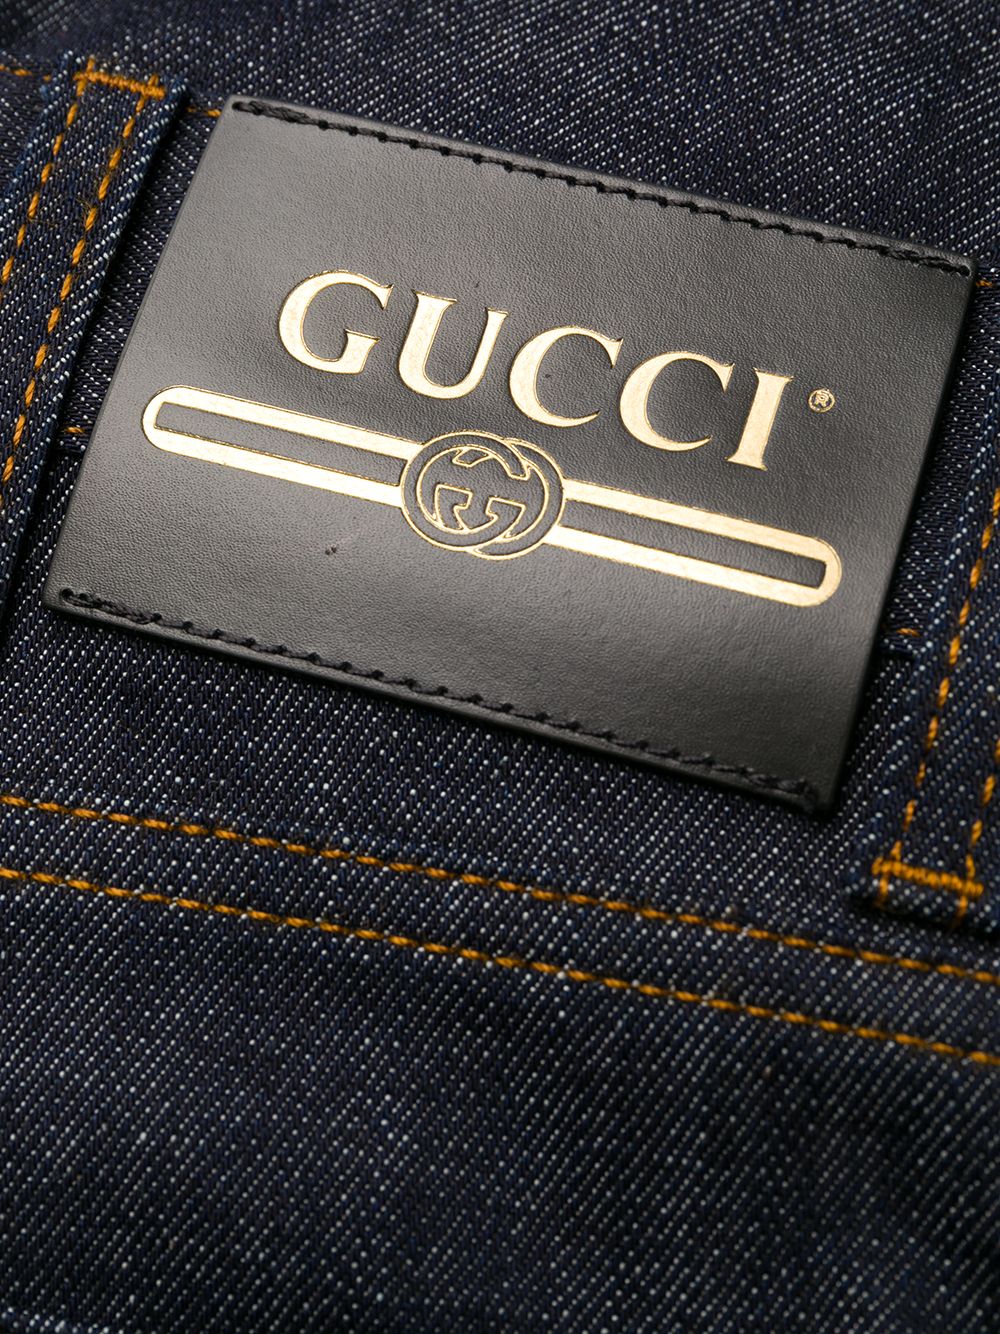 GucciTapered washed Jeans at Fashion Clinic